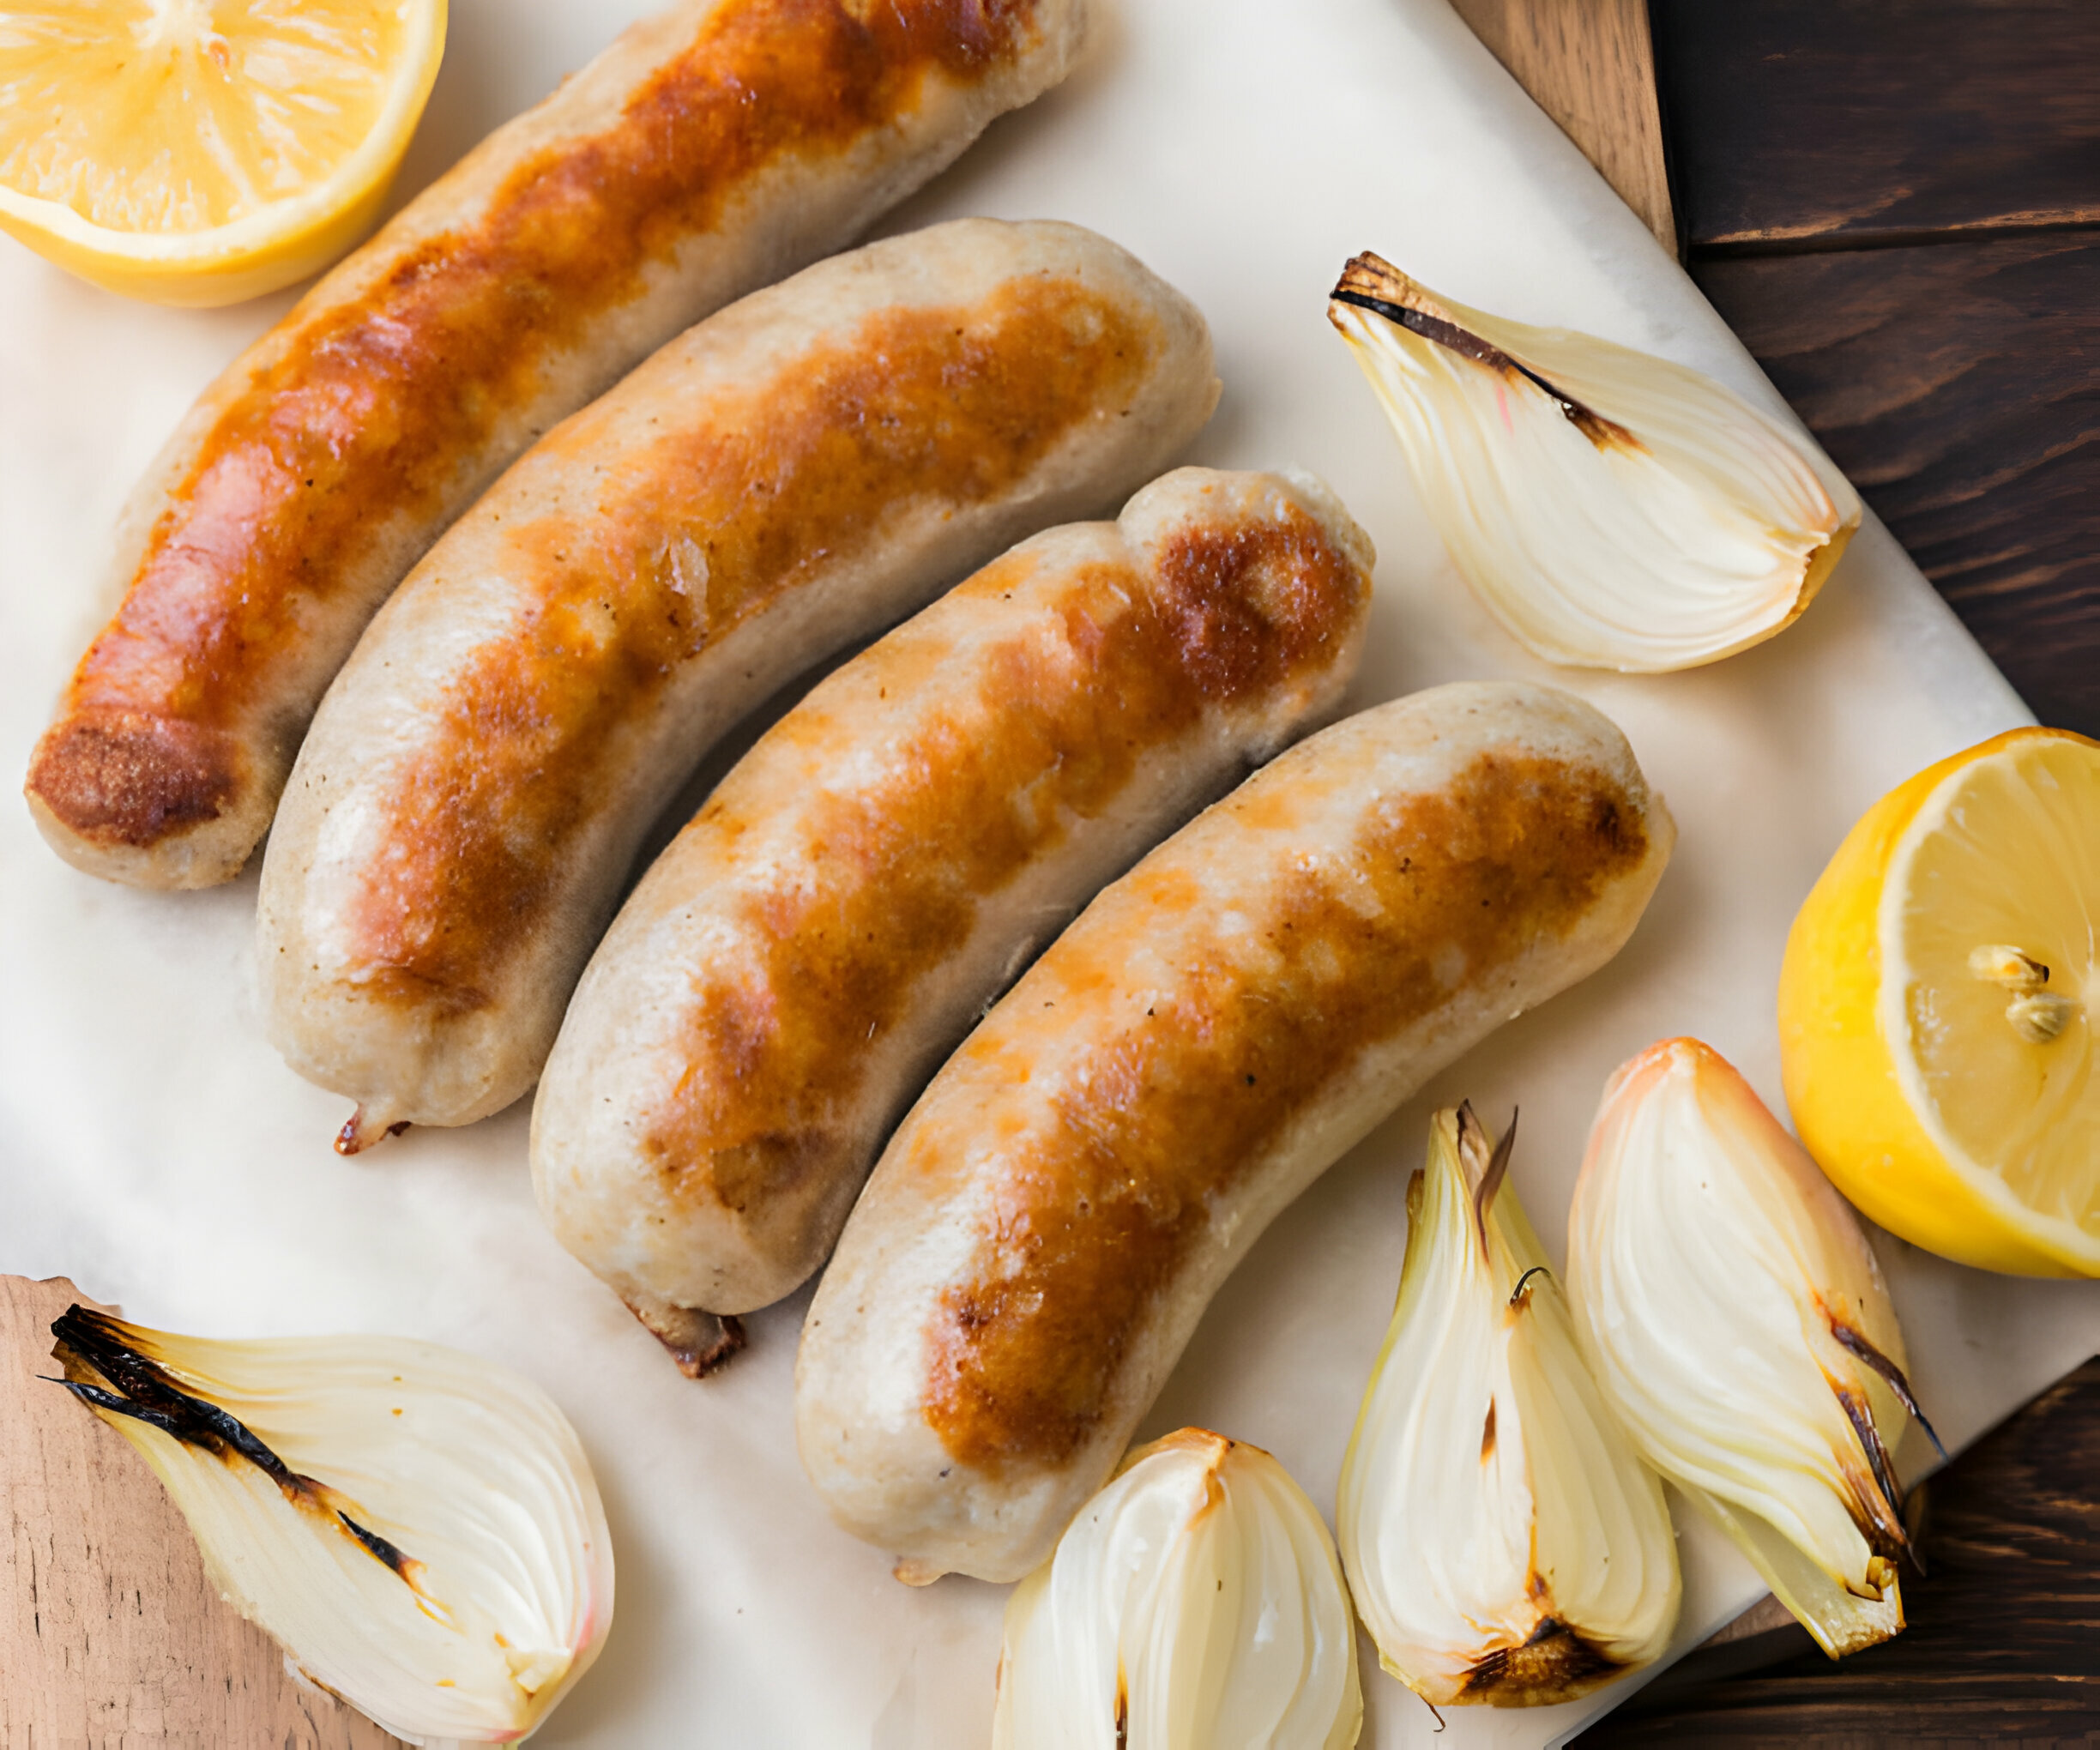 How To Cook Chicken Sausages? 